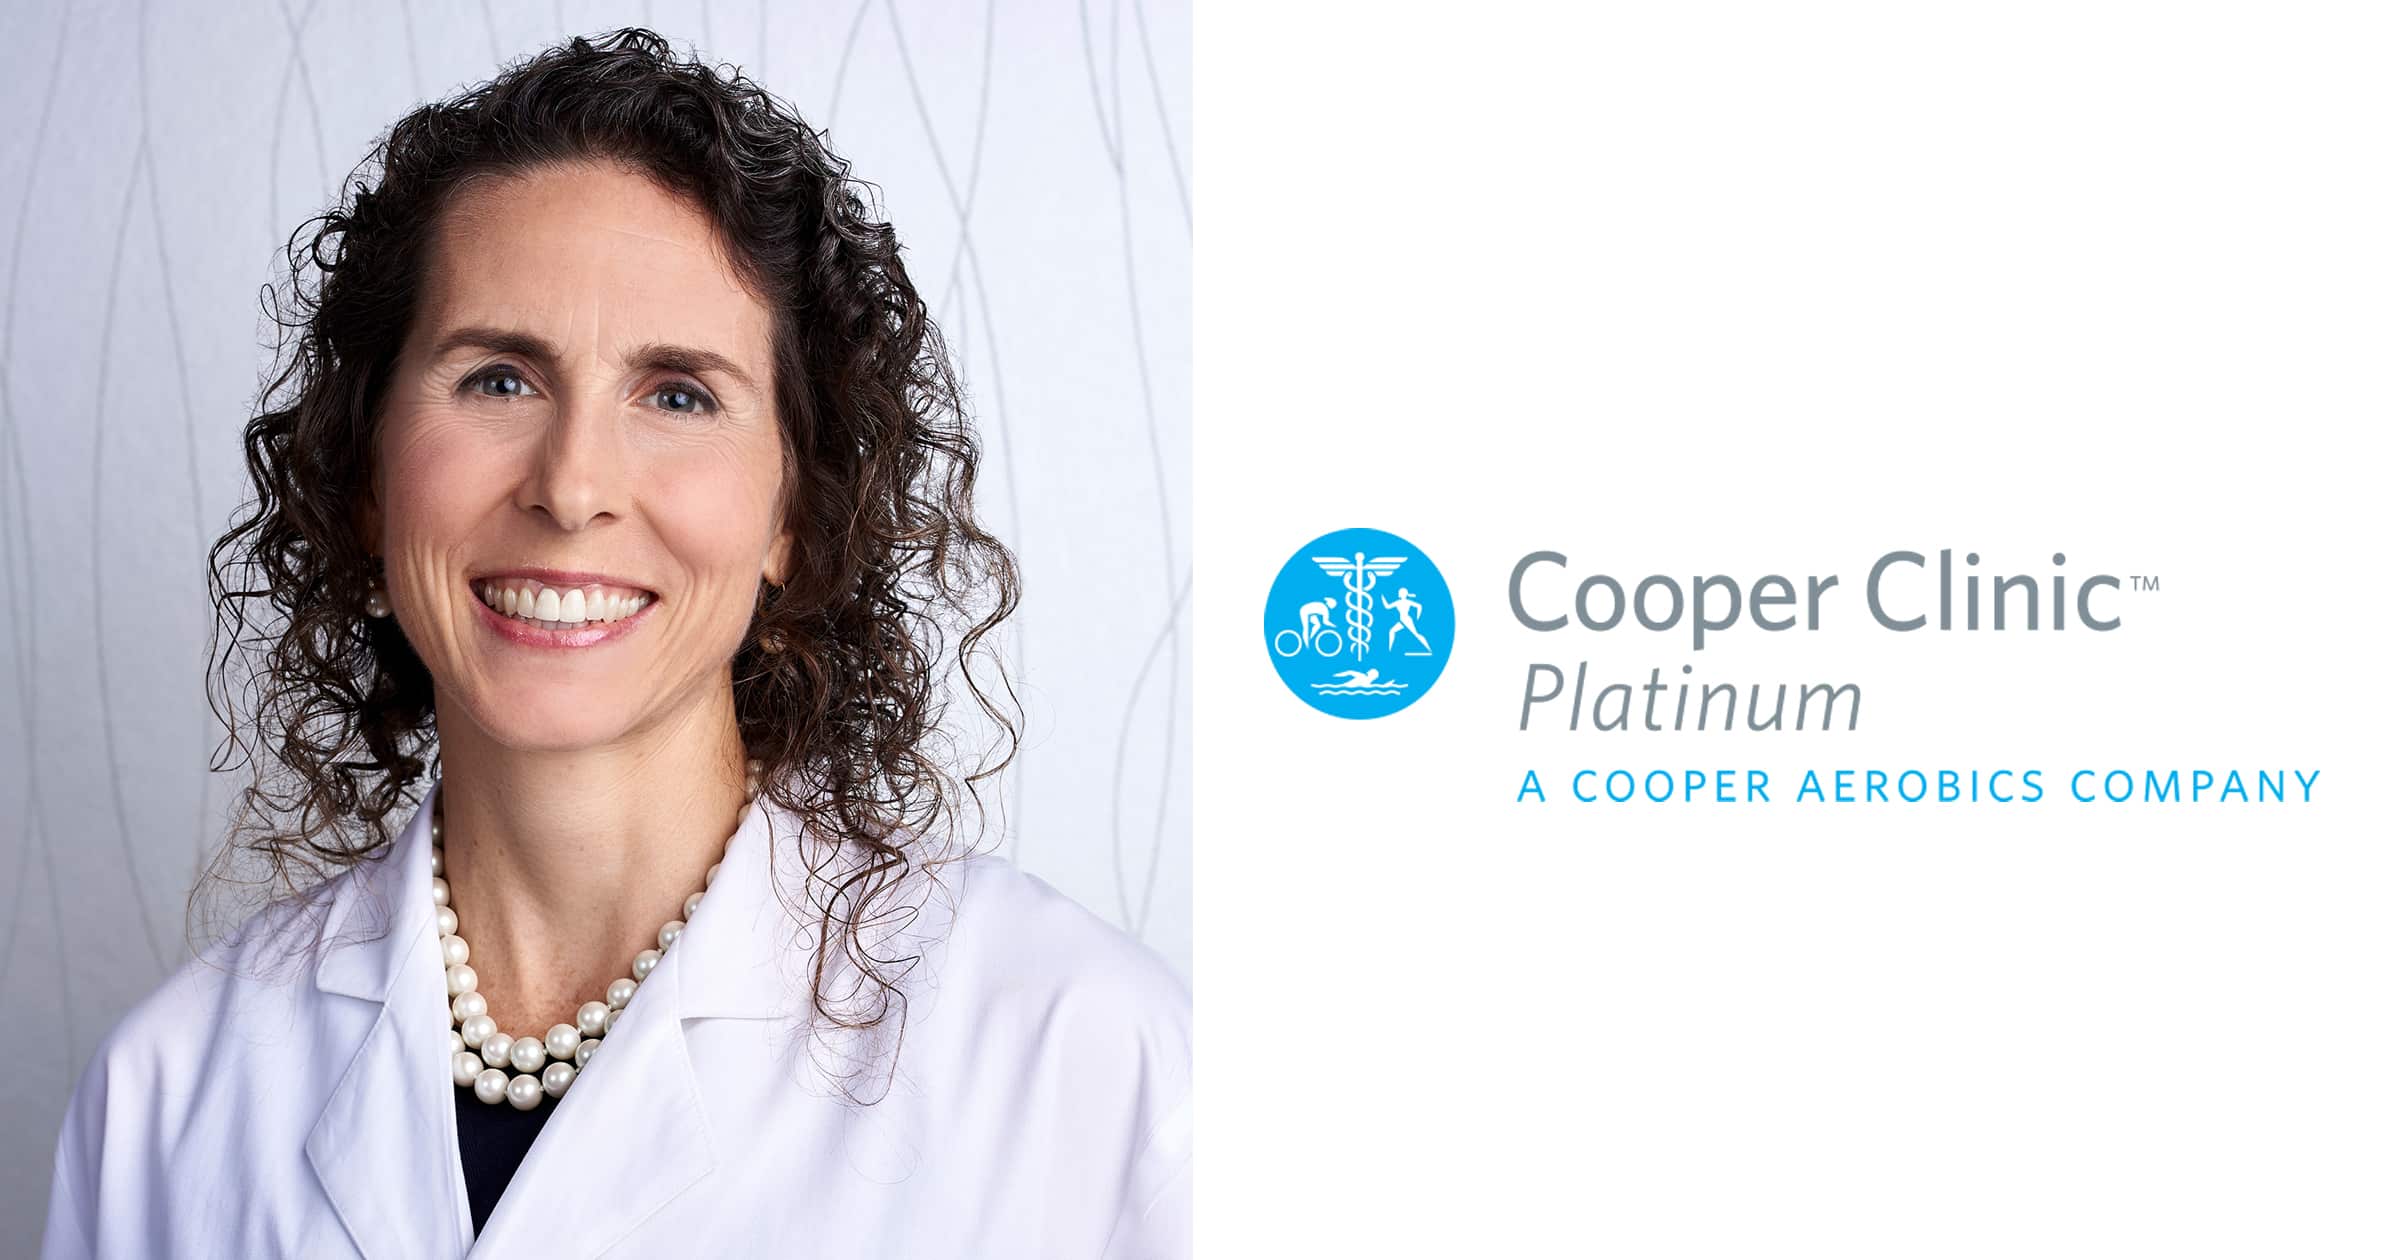 Cooper Clinic Platinum Physician Riva Rahl shares doctor vitamin recommendations